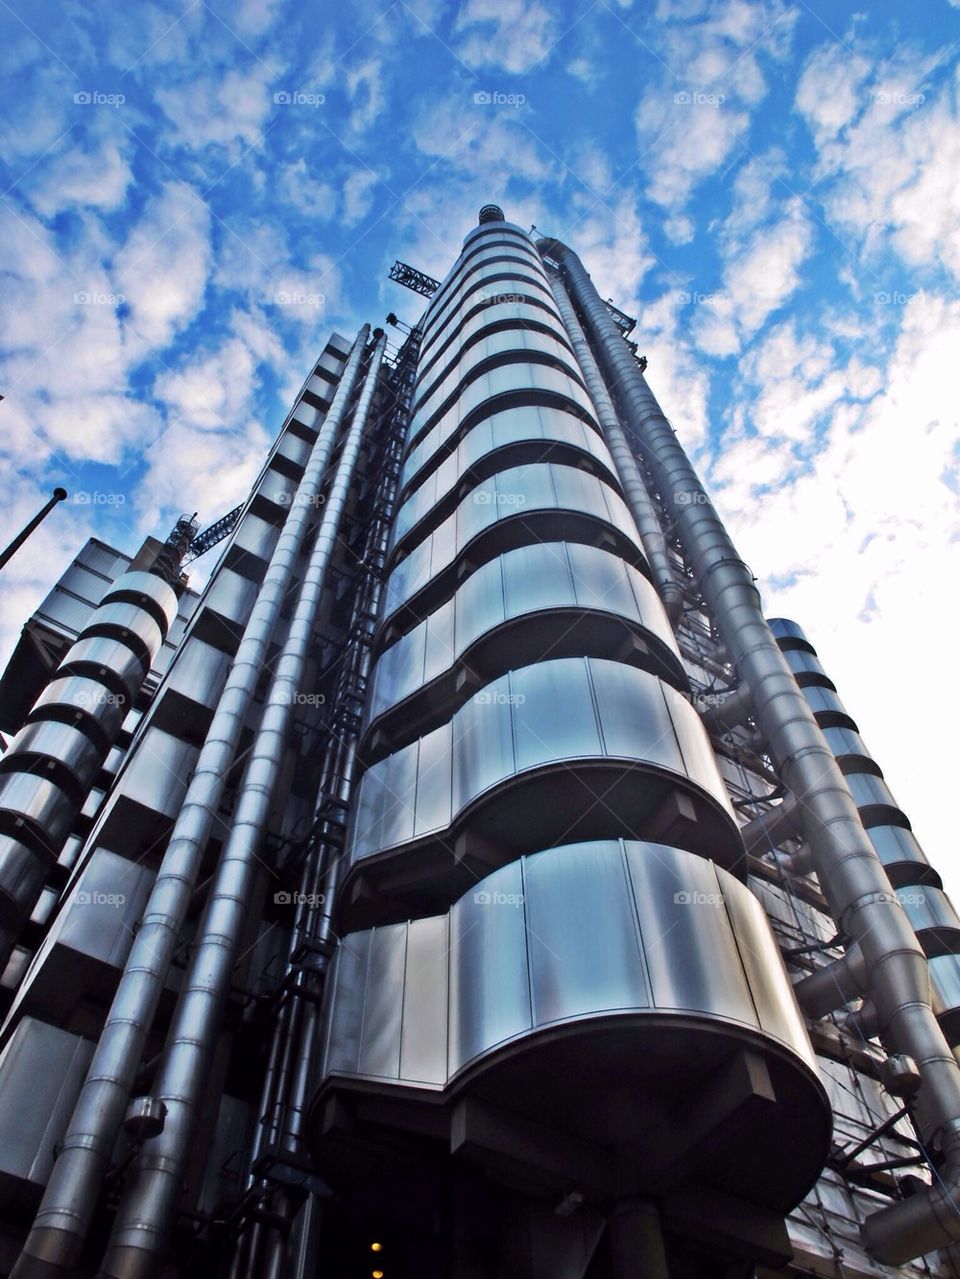 Lloyds building towers above